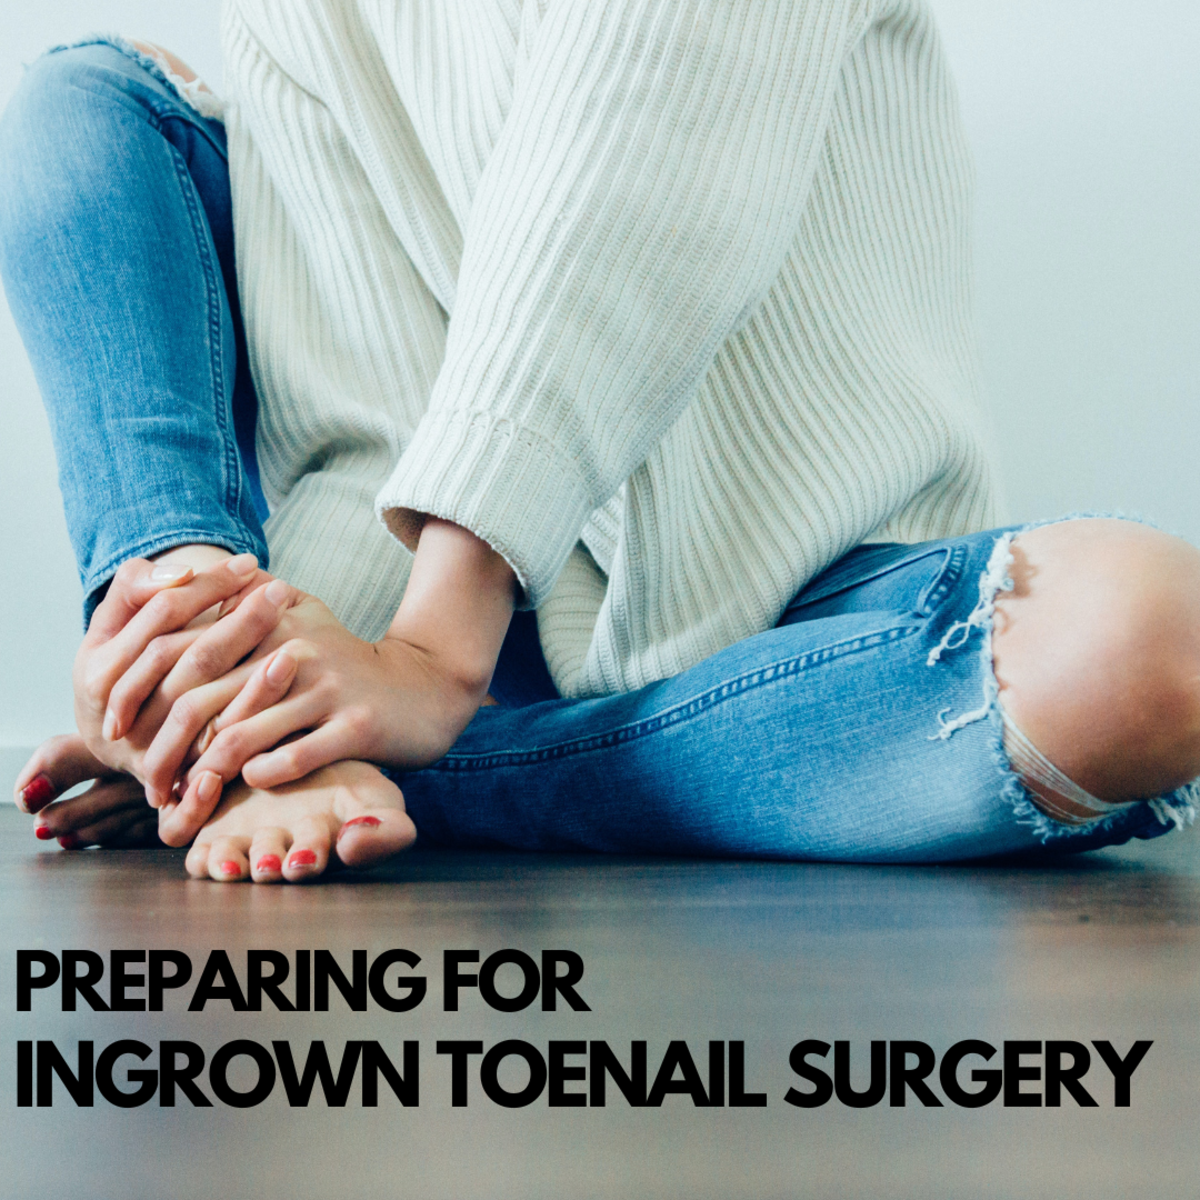 Ingrown toenail surgery does not always have to be as painful as it may seem.